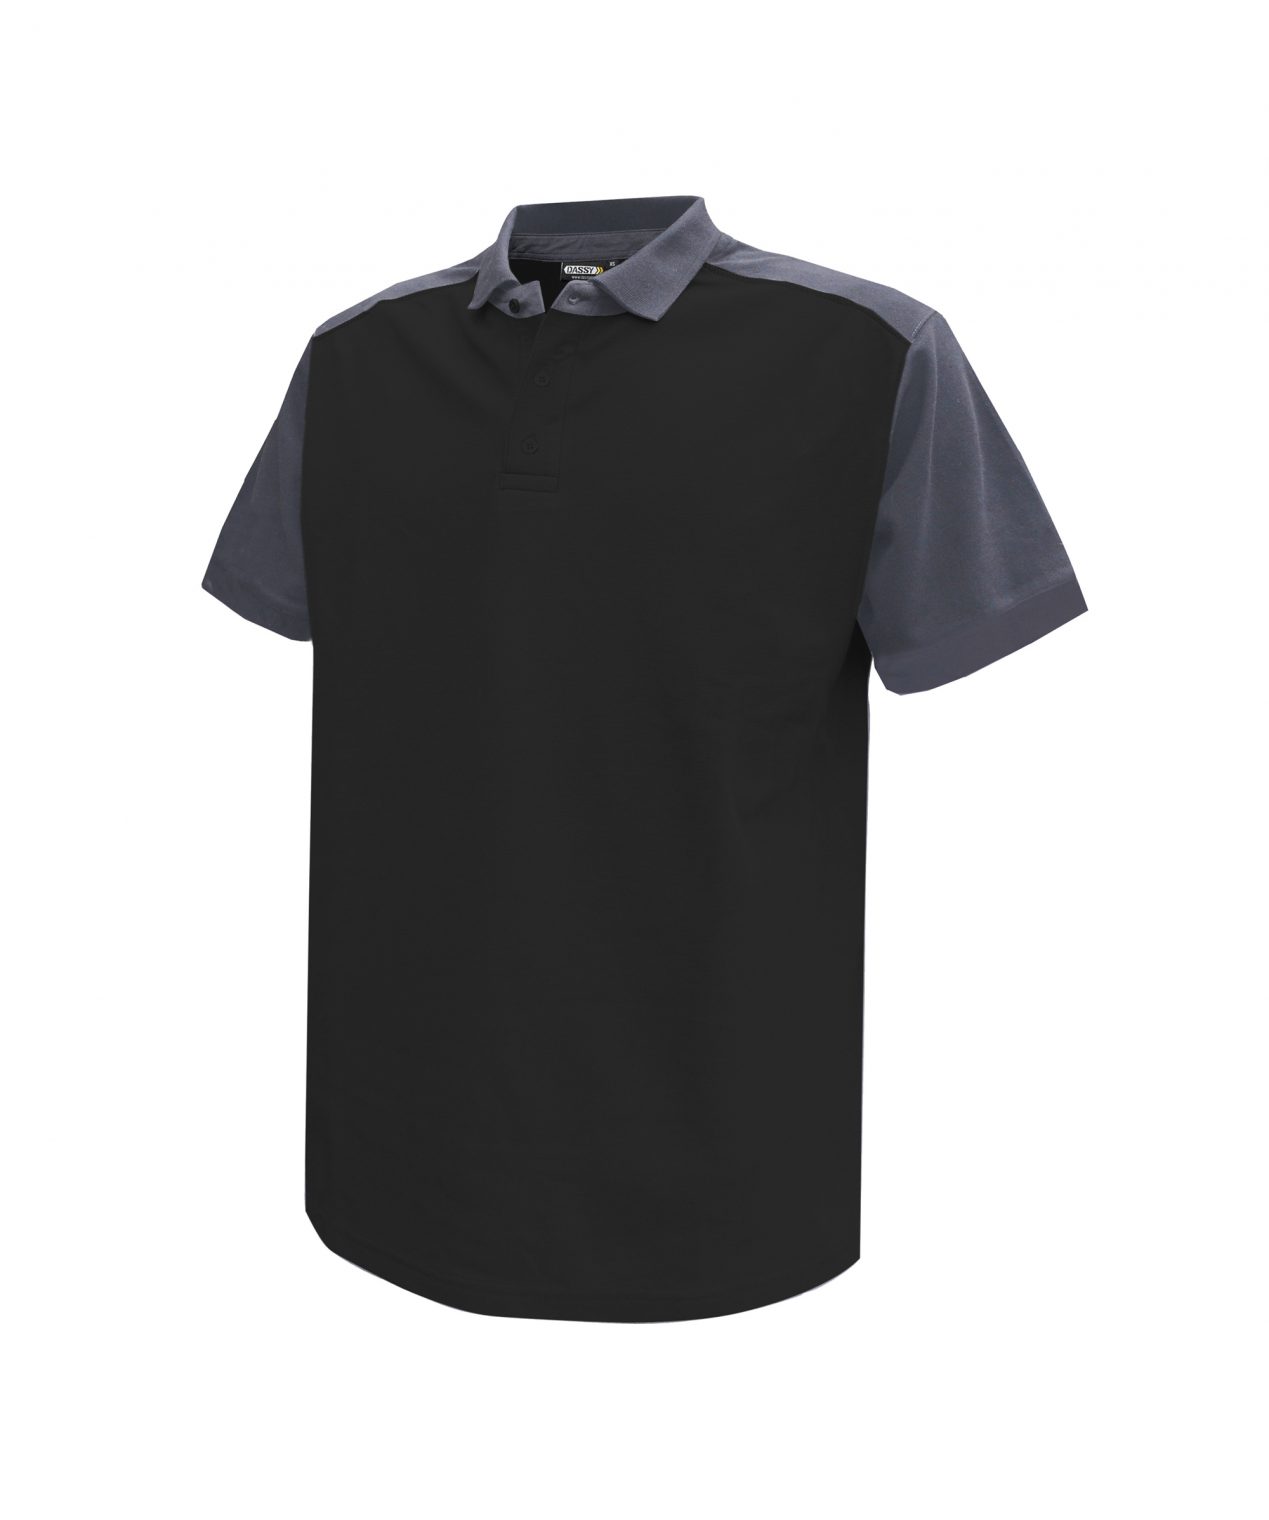 cesar two tone polo shirt black cement grey front